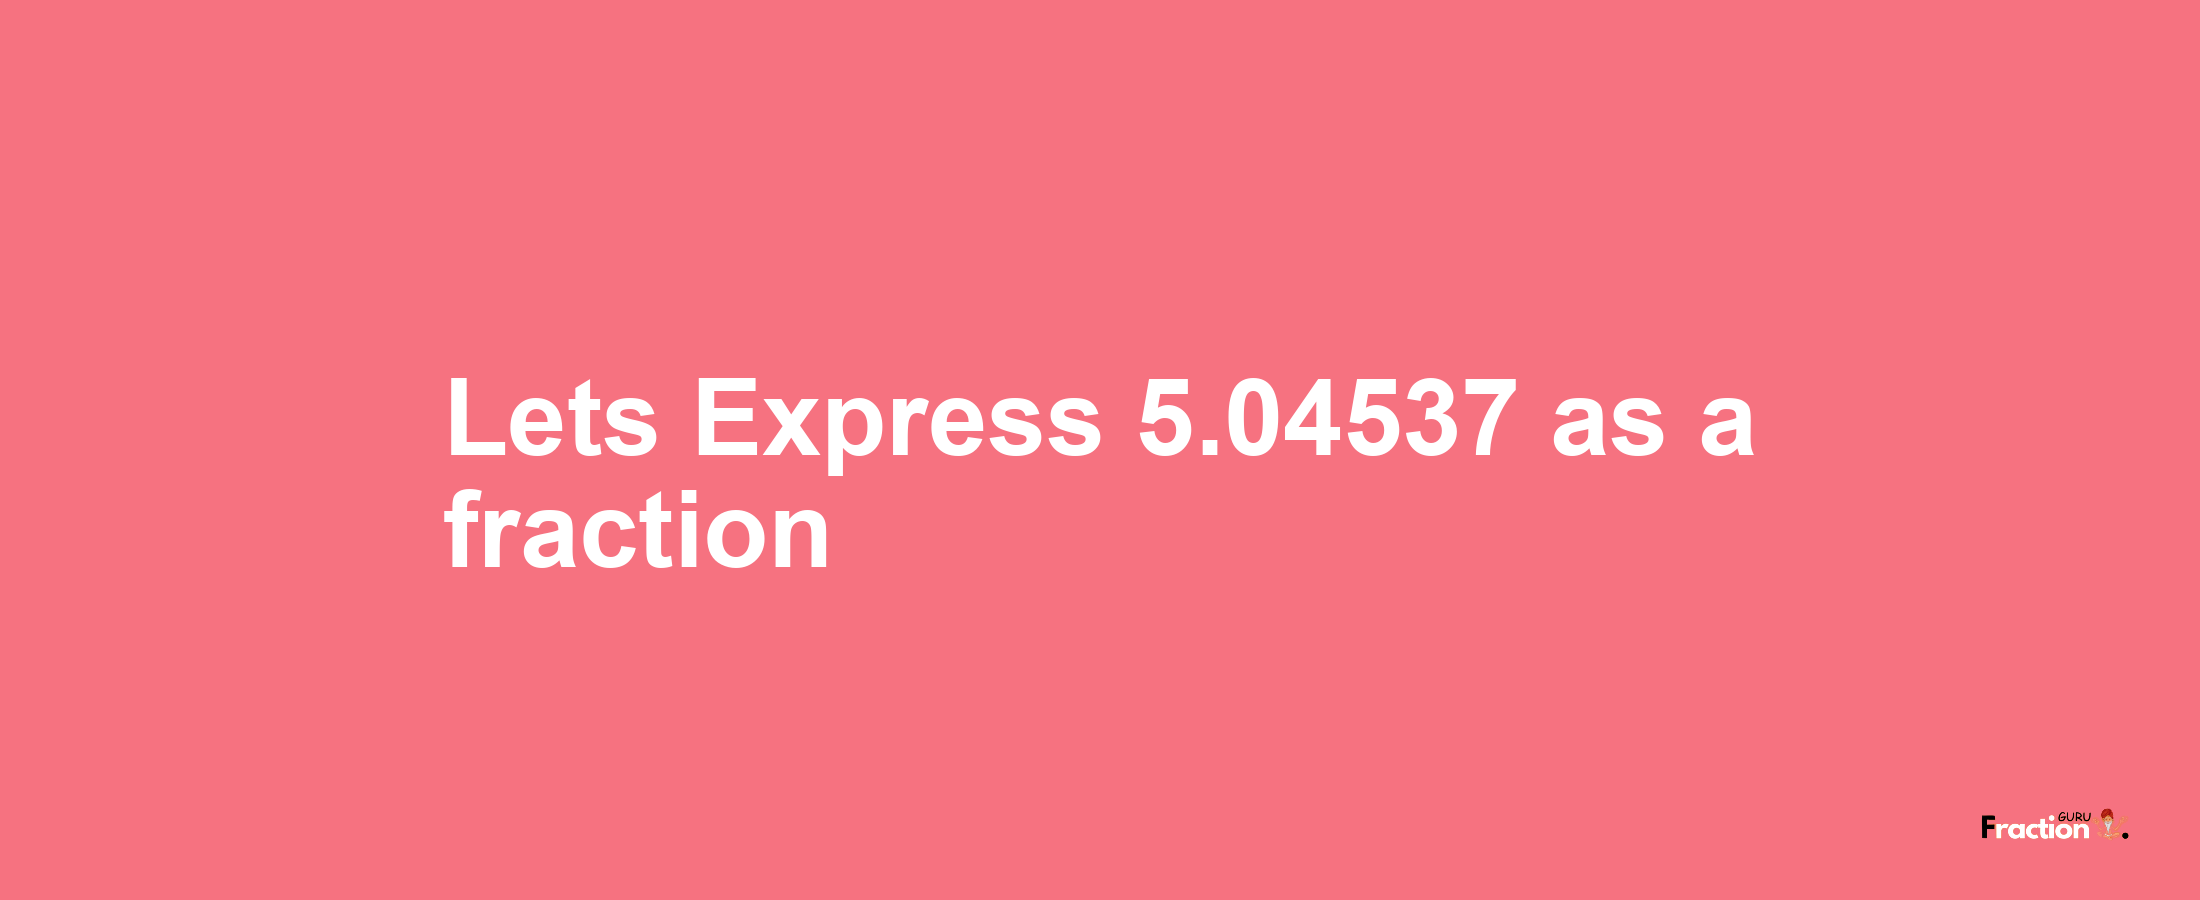 Lets Express 5.04537 as afraction